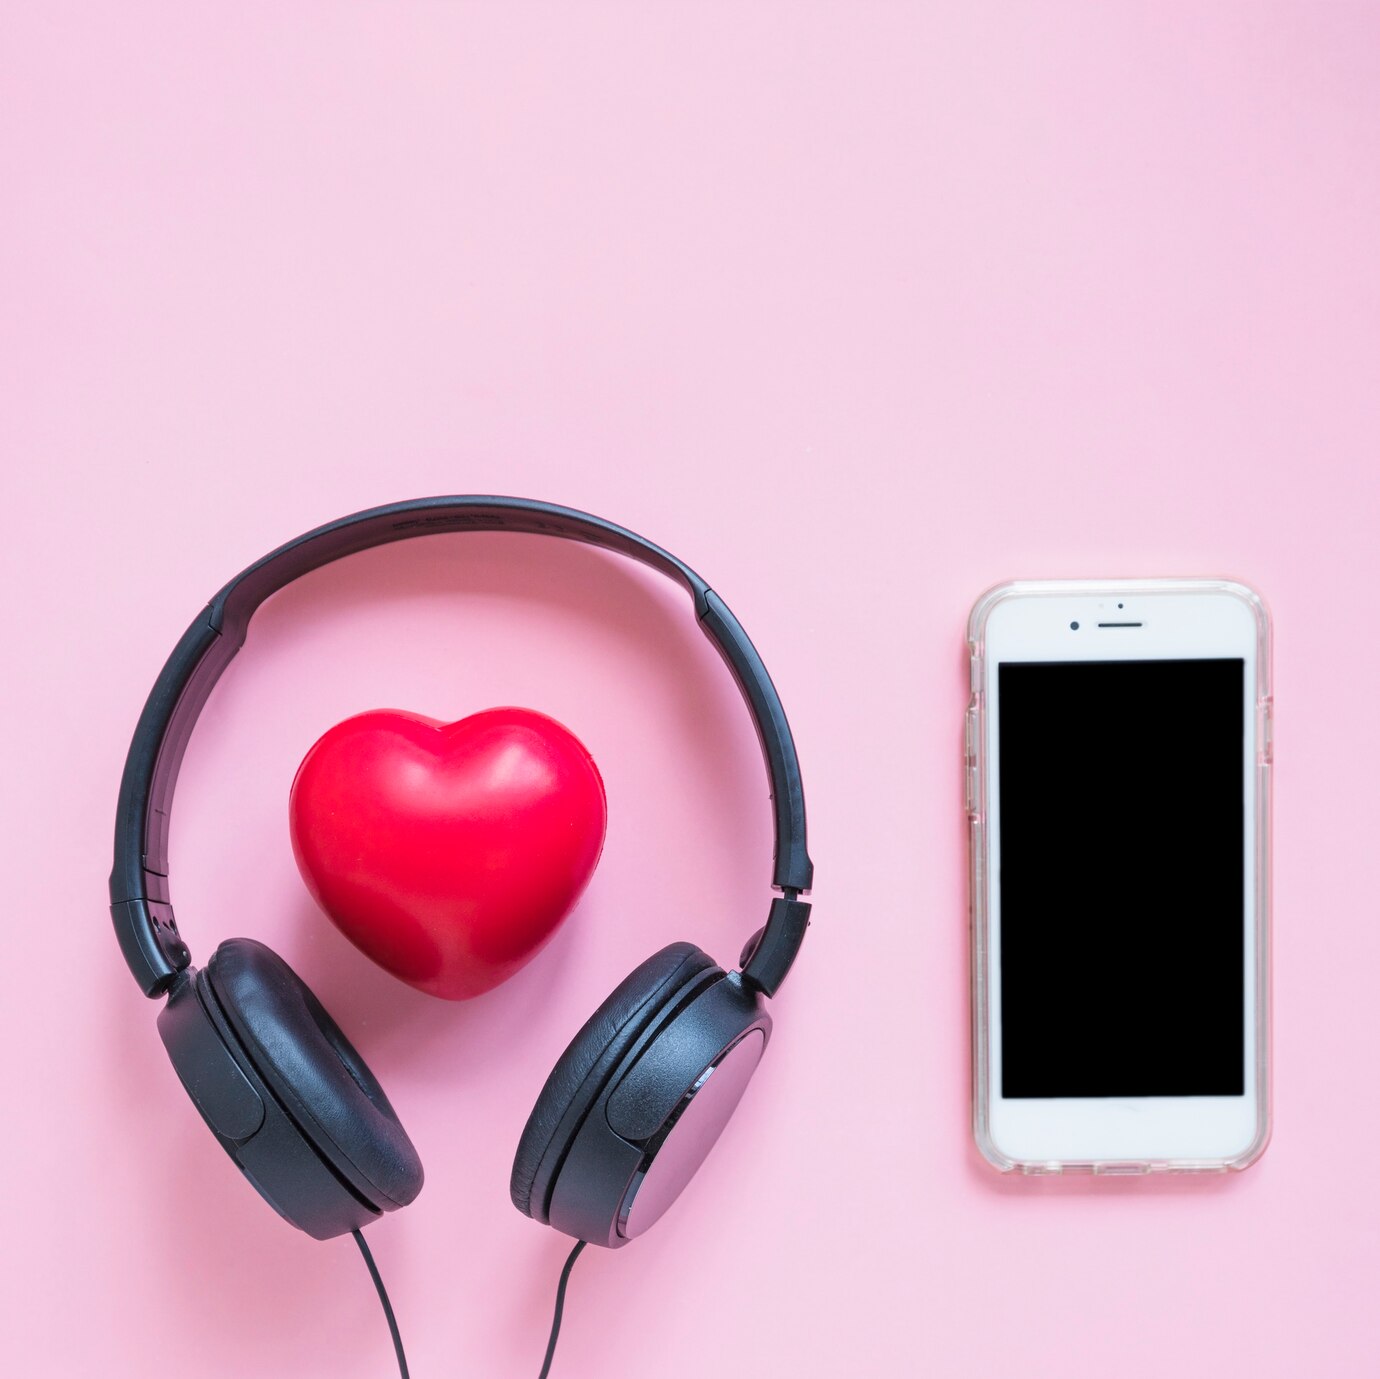 Where Can You Find Valentine's Love Songs?